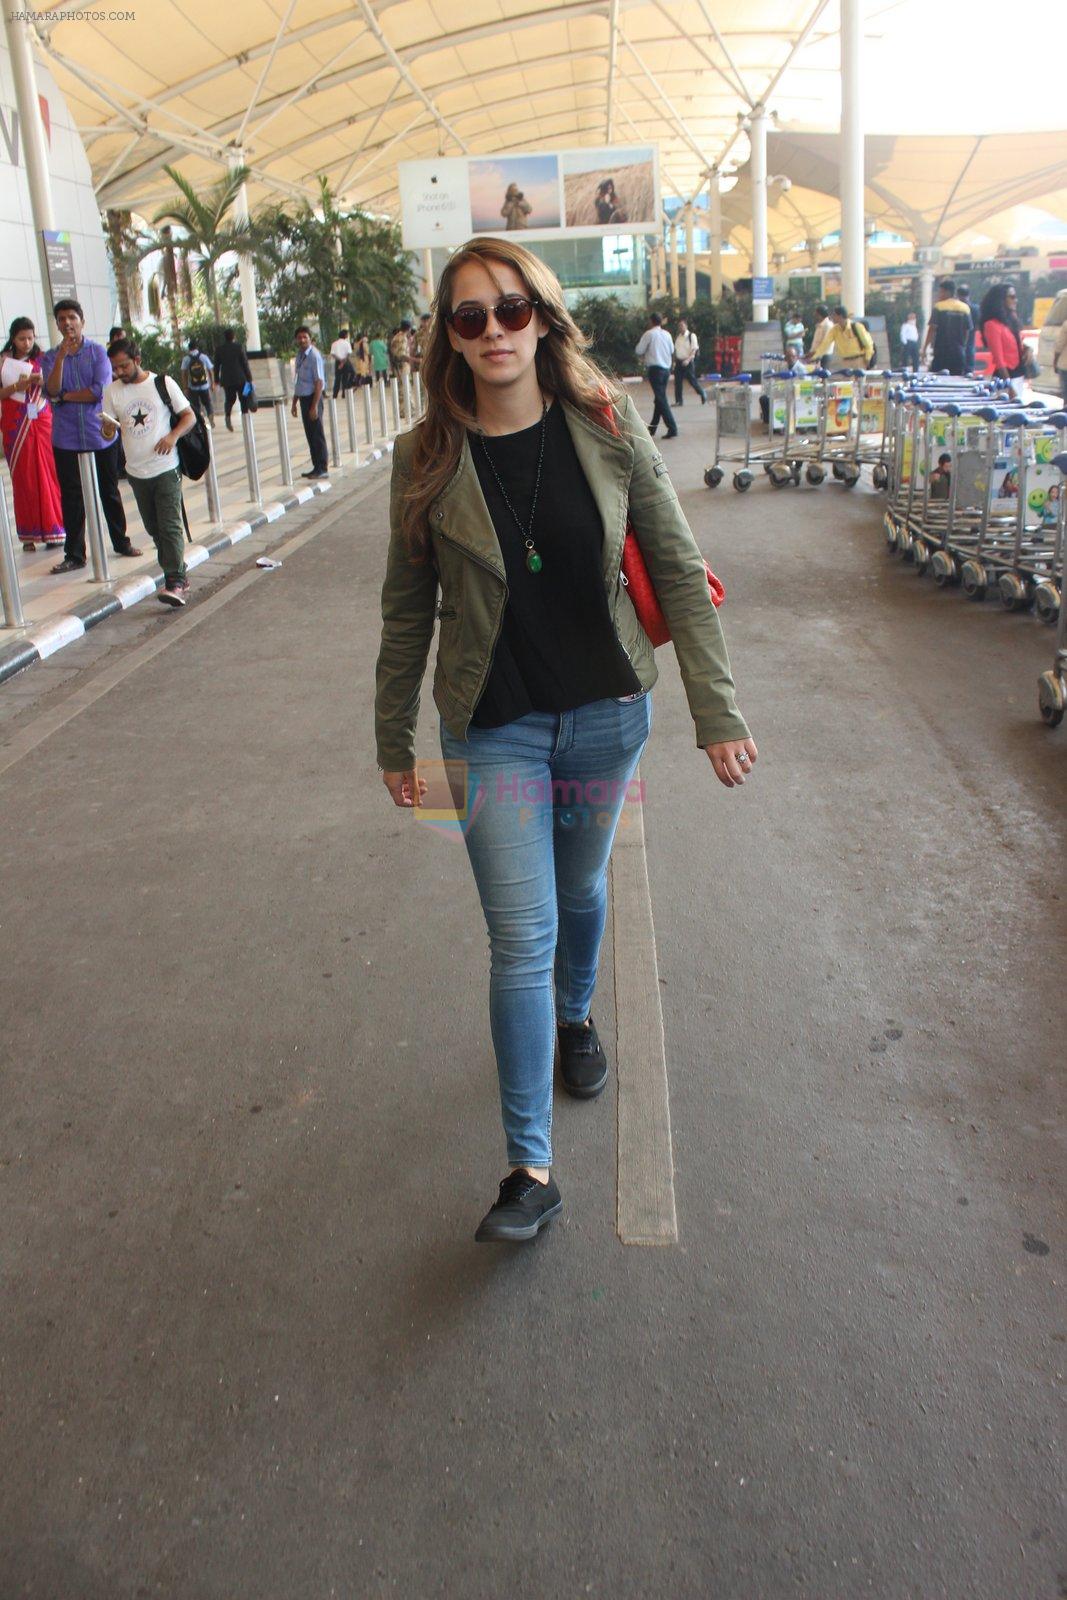 Hazel Keech snapped at airport on 11th March 2016